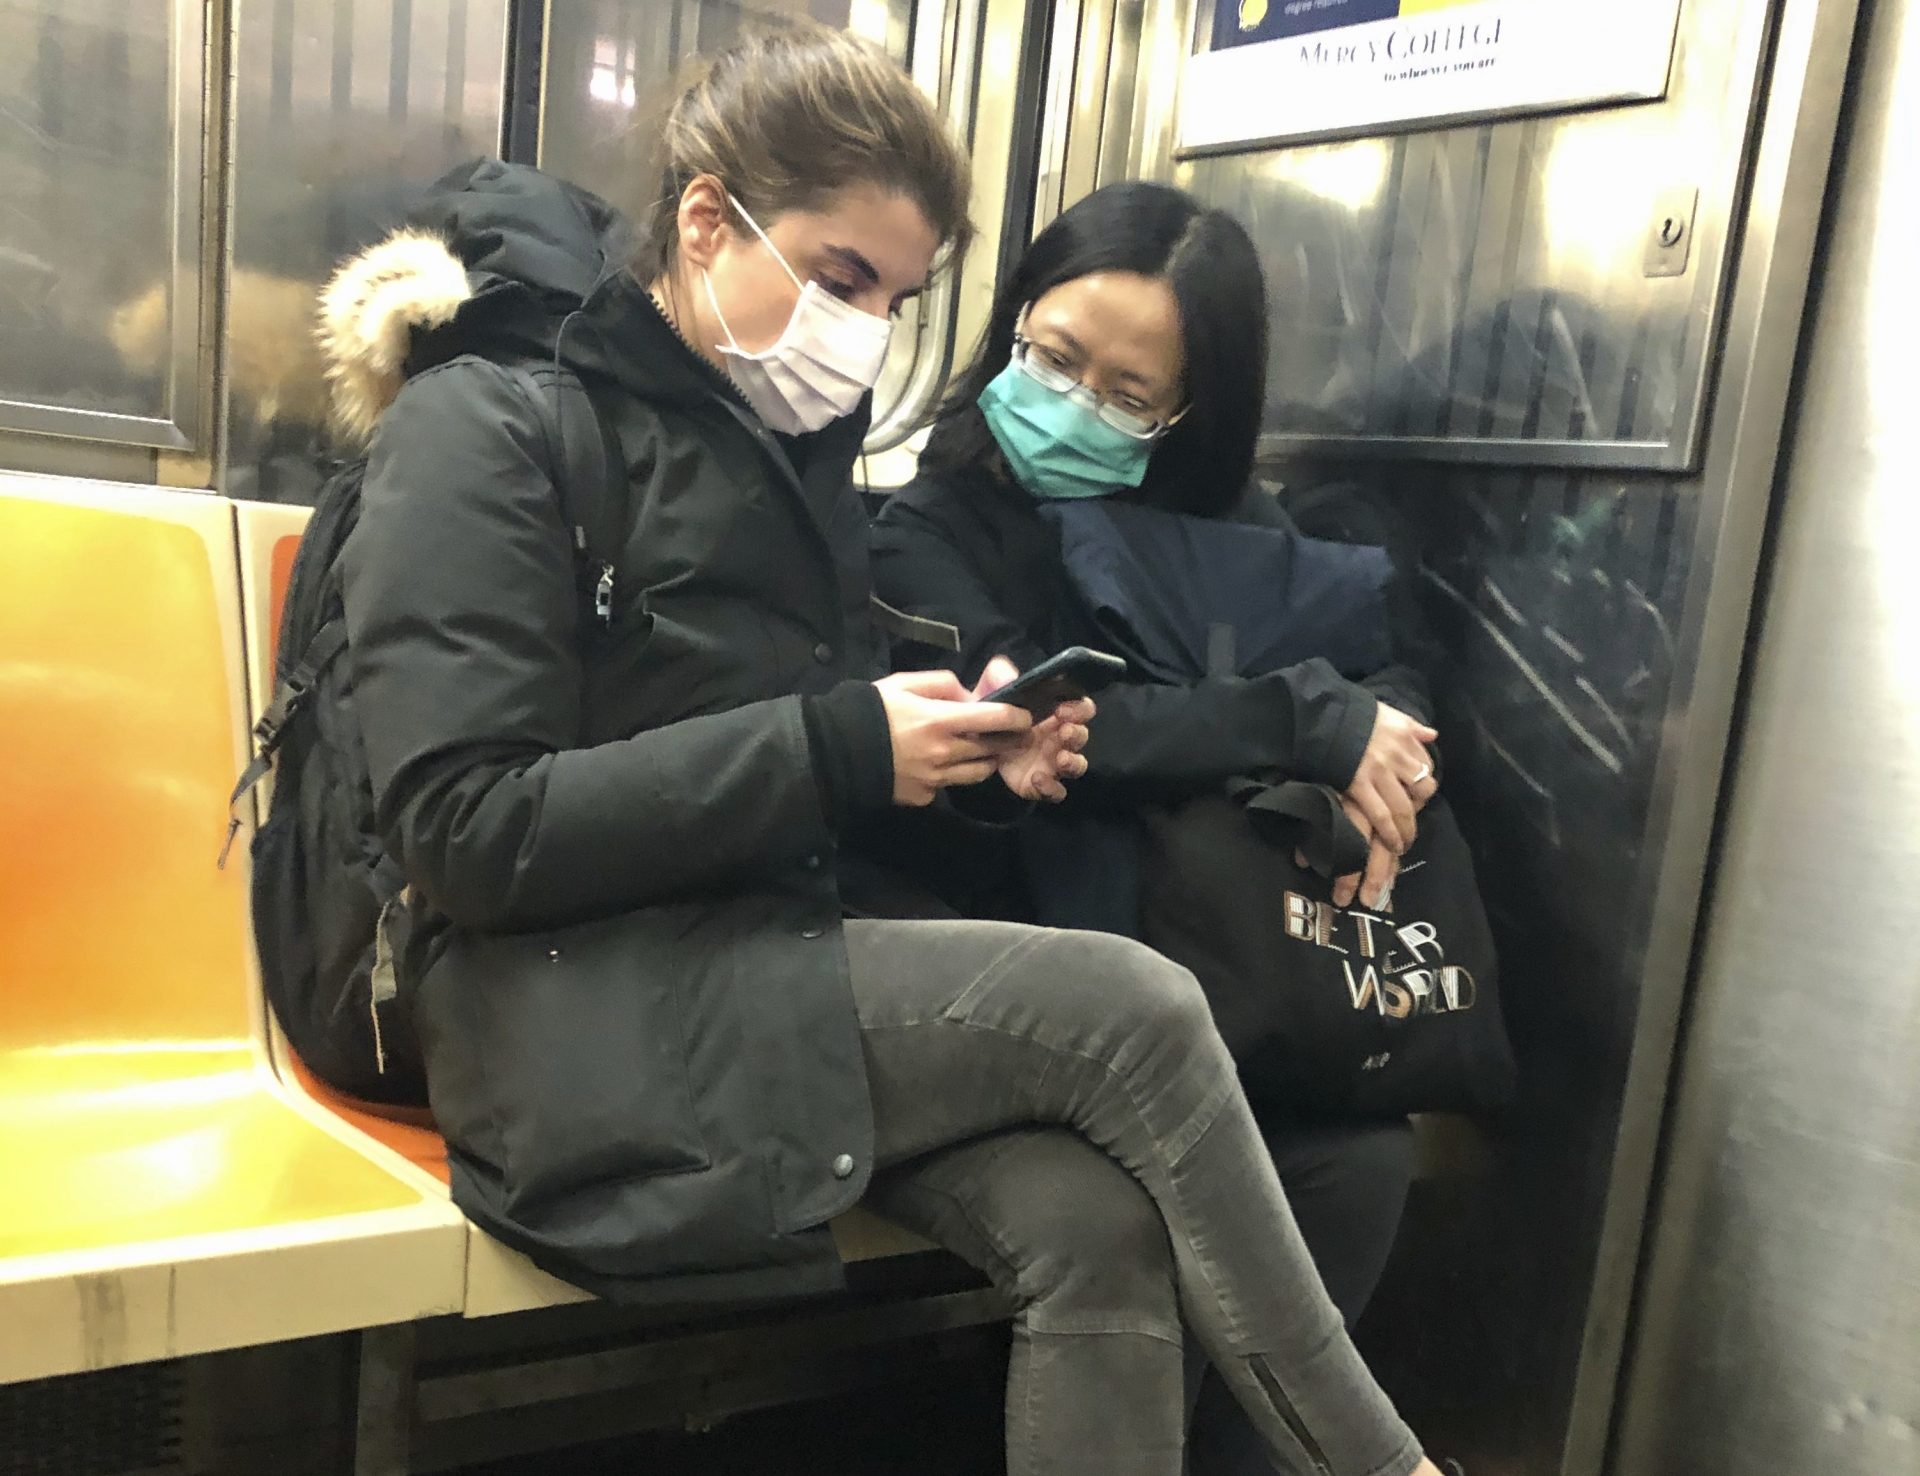 In this March 4, 2020 photo, two women wear masks as they ride a subway train, in New York. Two more cases of the new coronavirus have been confirmed in New York City, raising New York state's total to 13, Mayor Bill de Blasio said Thursday.